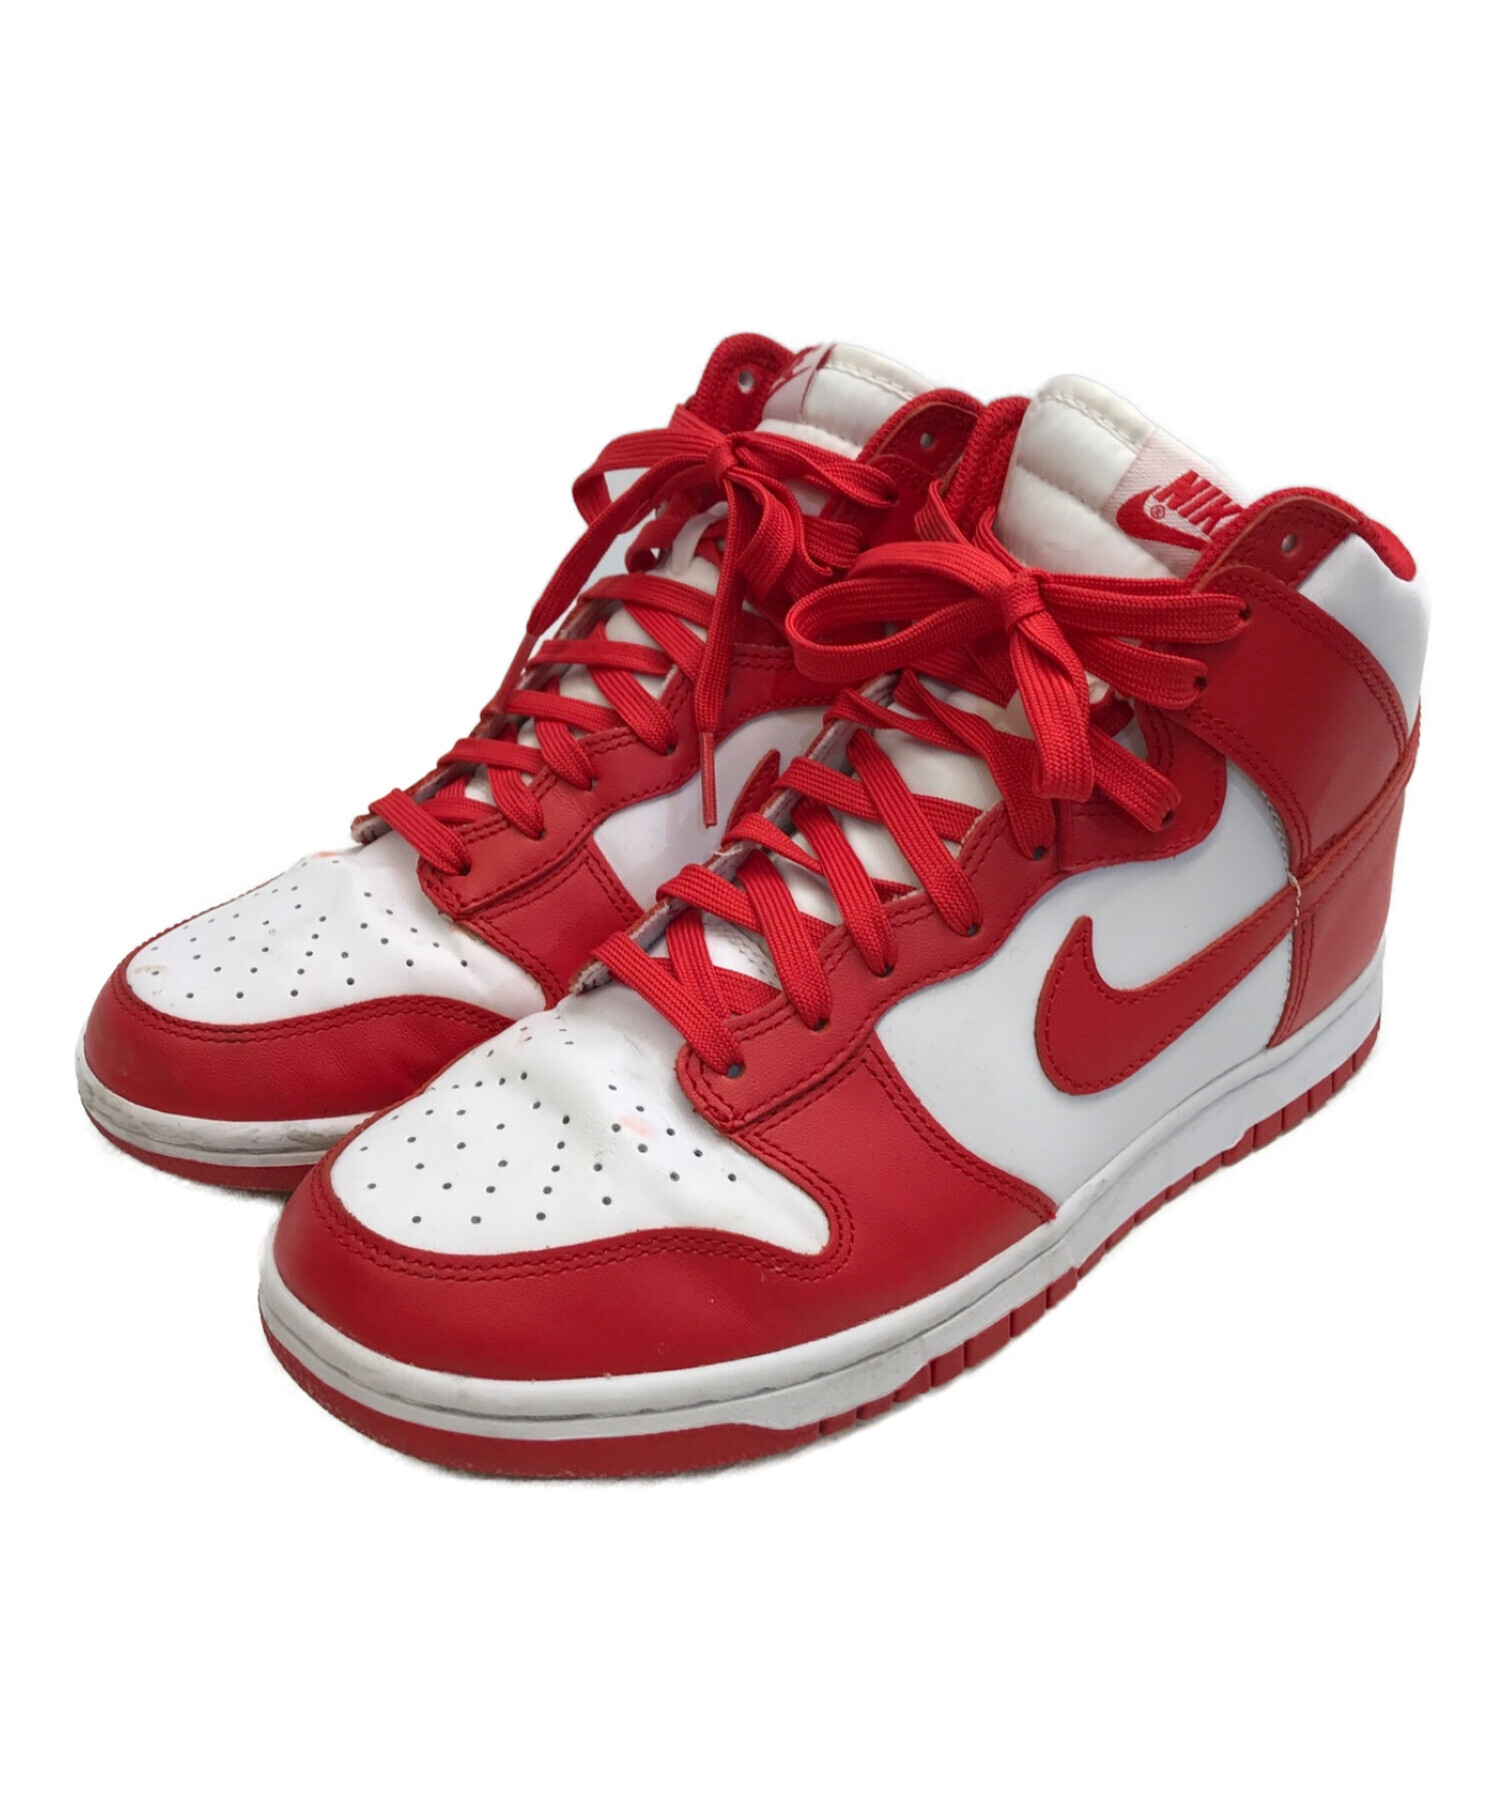 Nike DunkHigh Championship White and Red